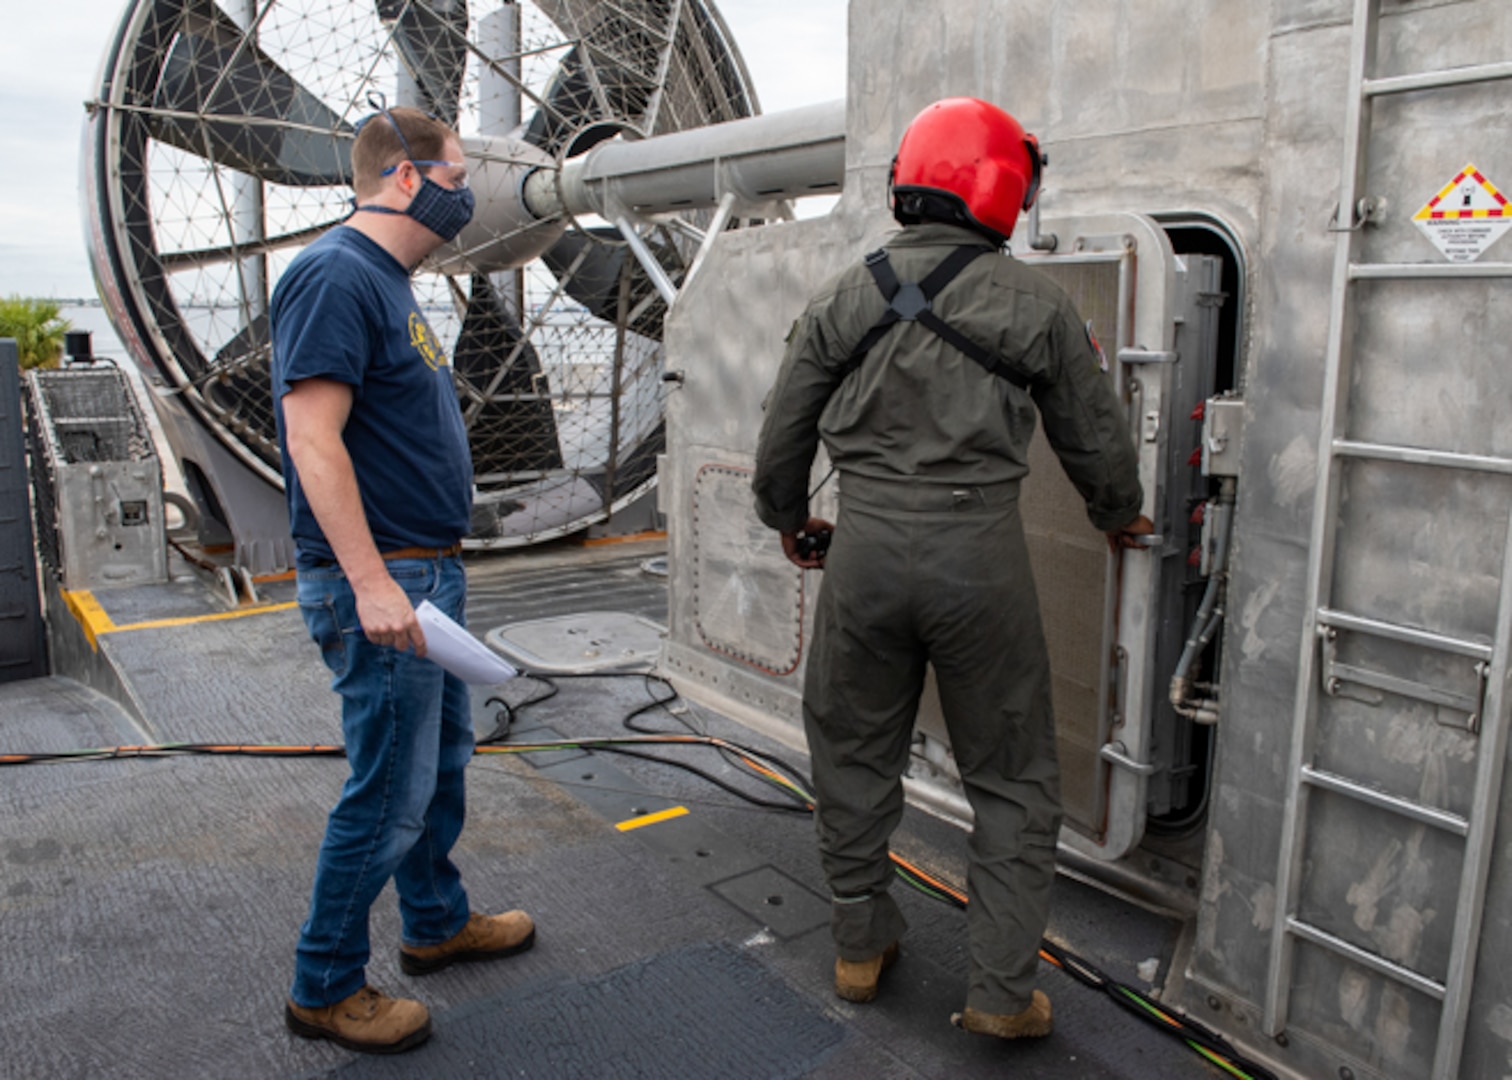 Ben Ridenour (left), an engineer in Carderock’s Vulnerability Assessment Branch, observes as BM2 Michael Tige (right) begins to troubleshoot the LCAC 100 after it has received damage in the controlled damage test.